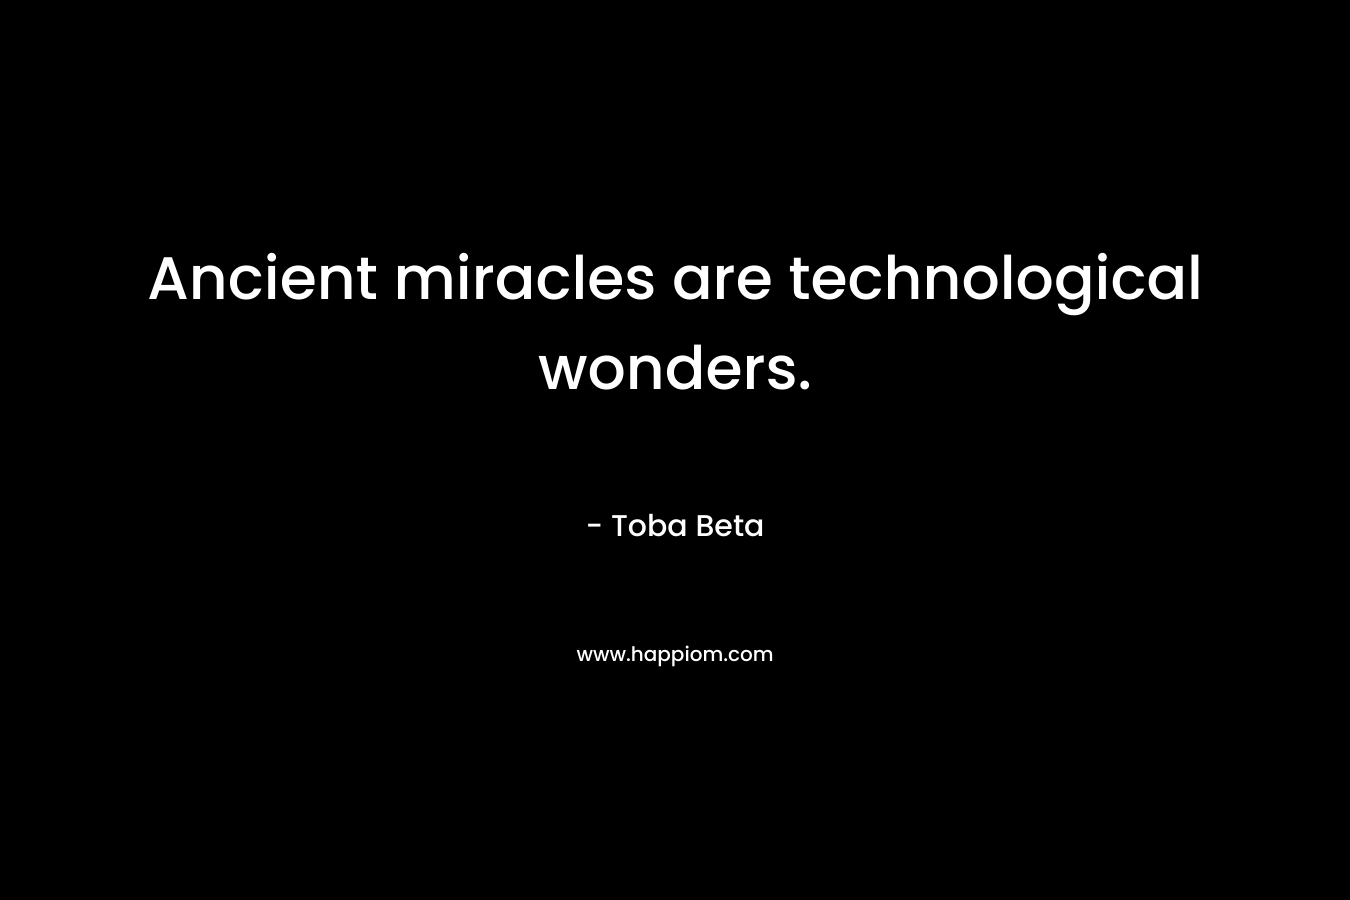 Ancient miracles are technological wonders.